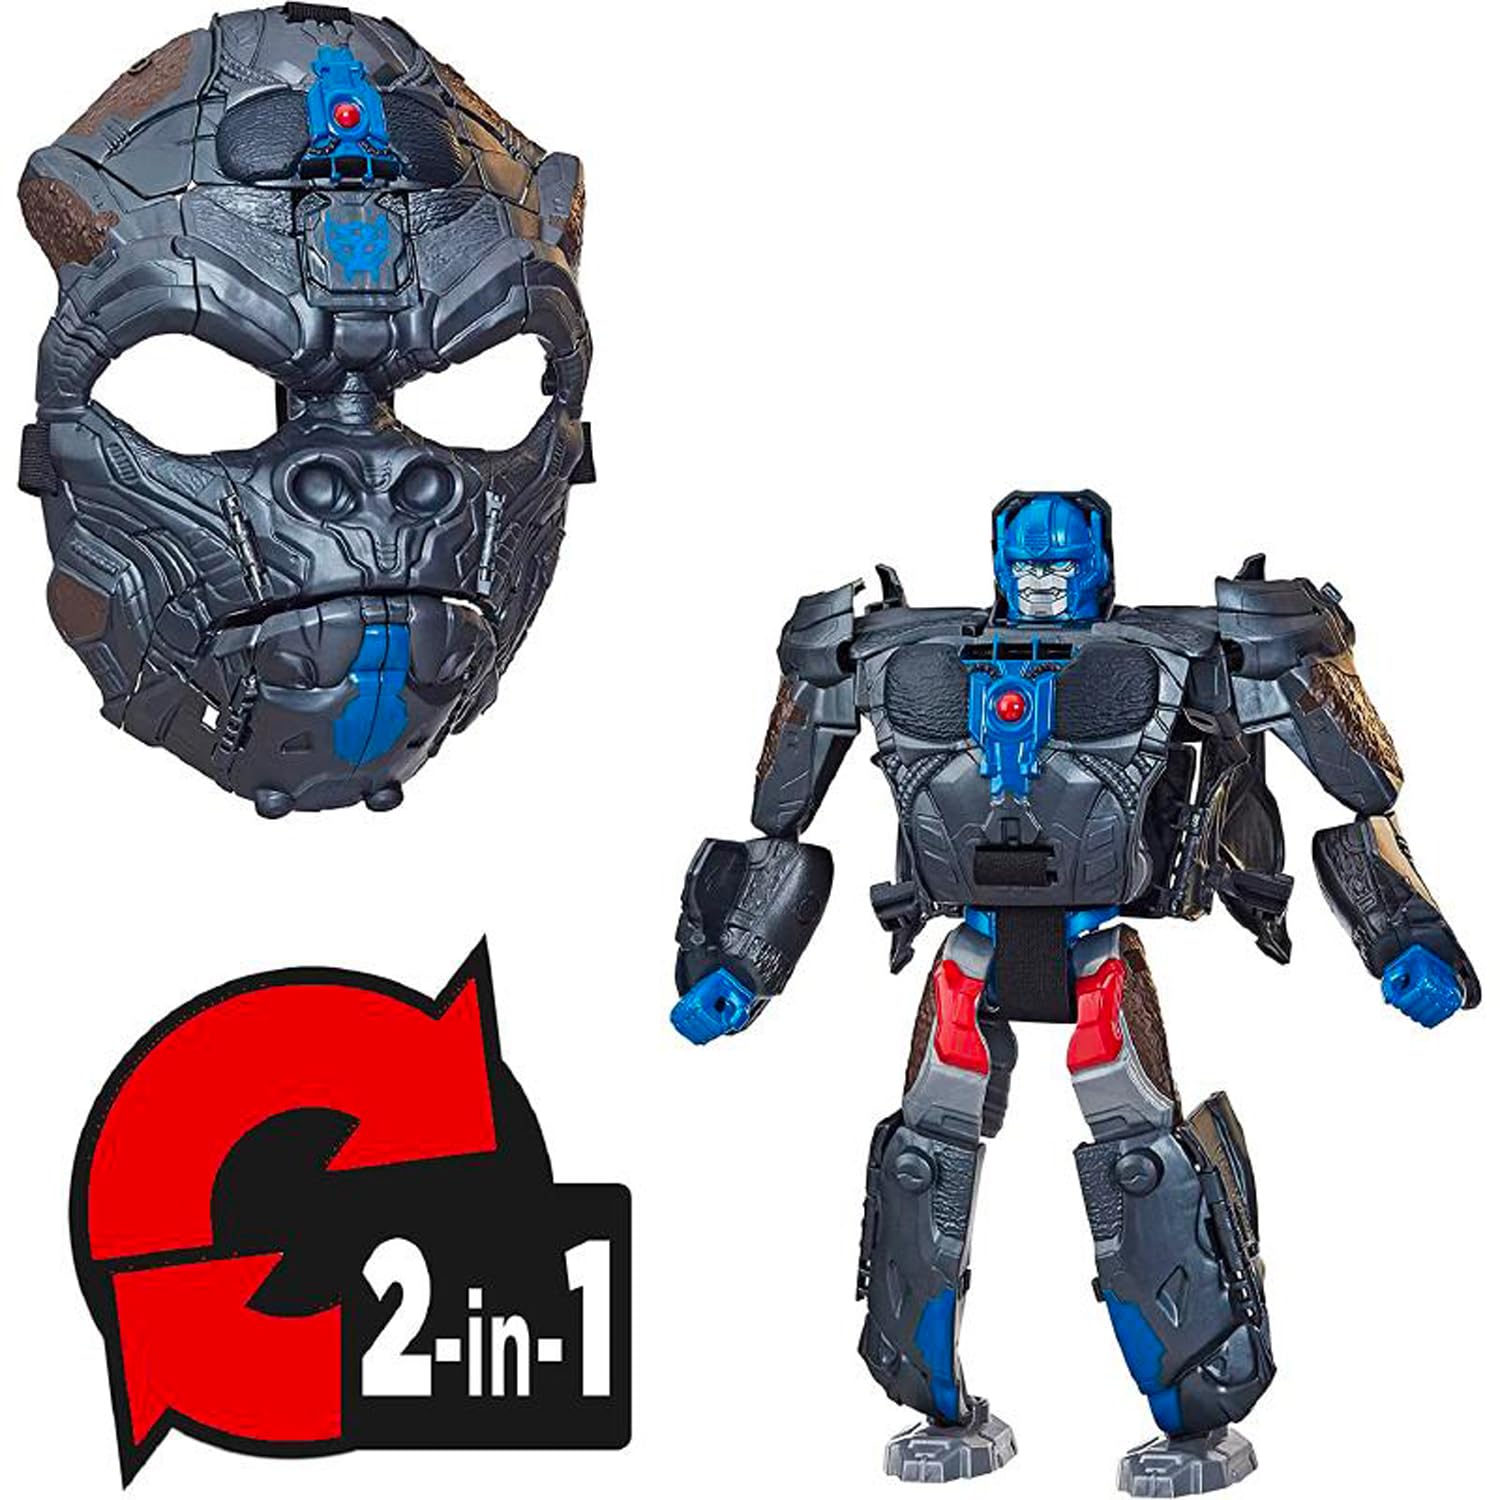 Transformers Toys Rise of the Beasts Movie Optimus Primal, Perfect for Halloween Costume, 2-in-1 Converting Roleplay Mask Action